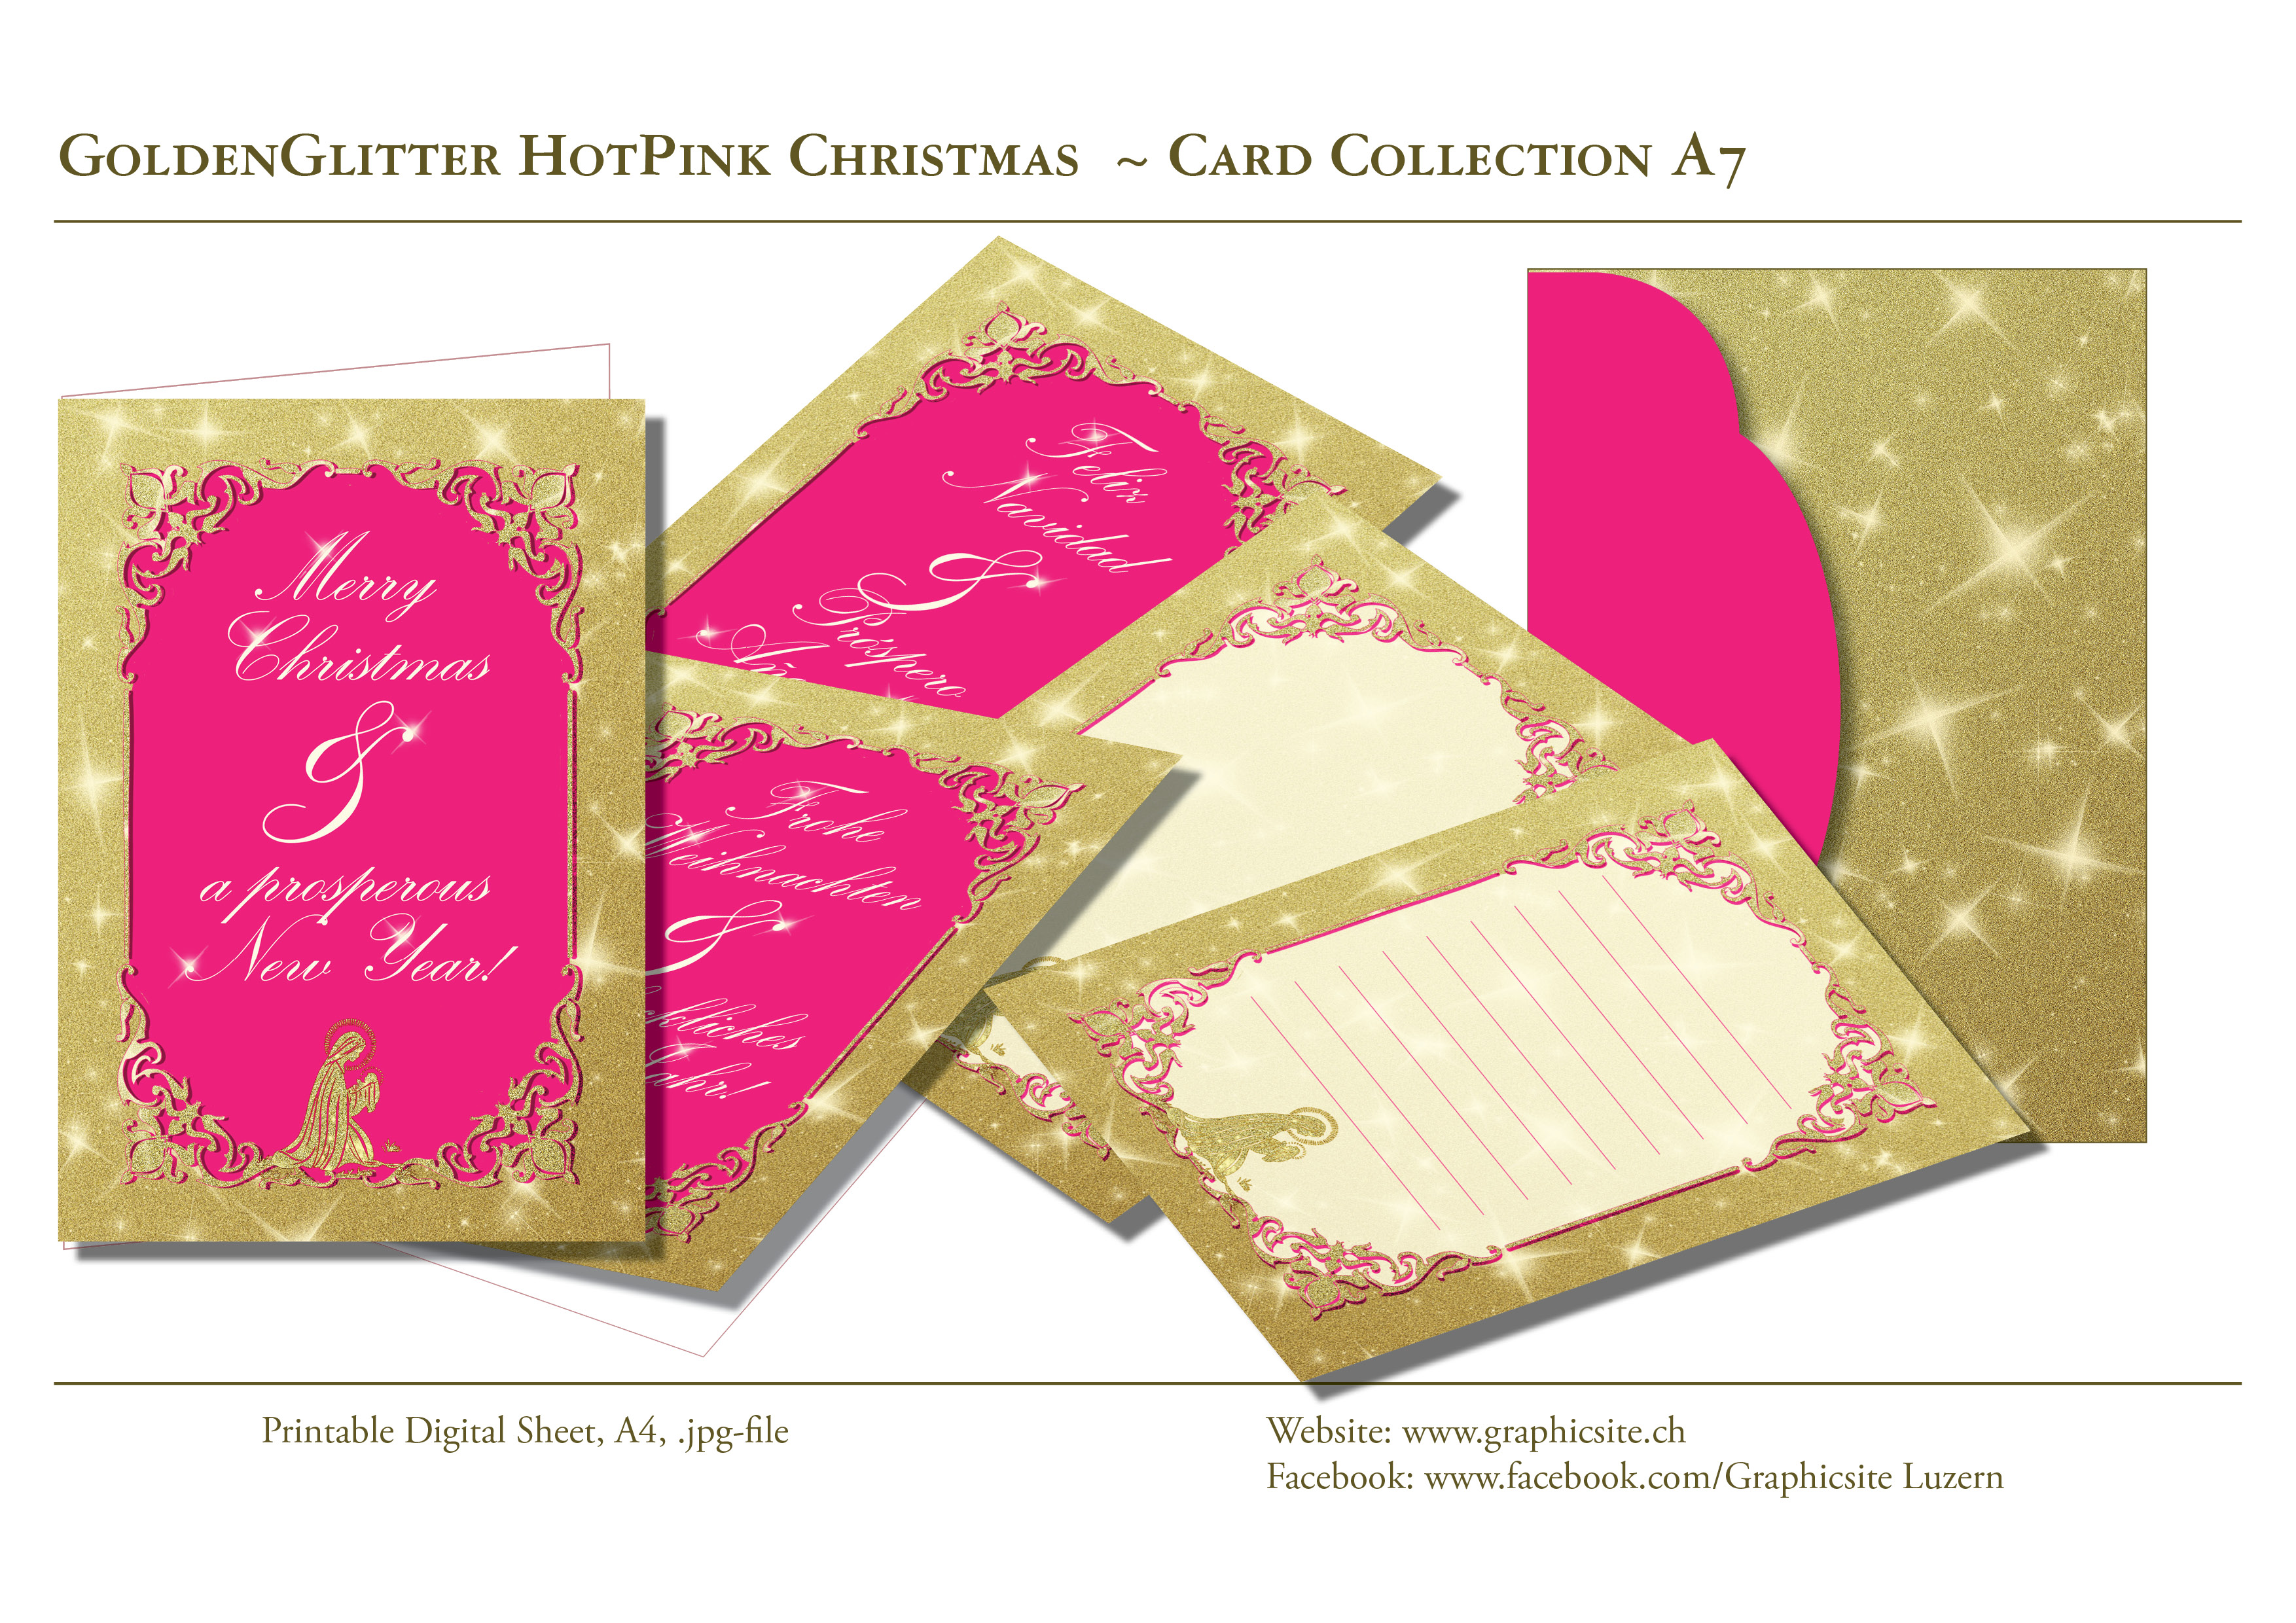 Printable Digital Sheets - Card Collection A7 - Christmas - Greeting Cards, Golden Glitter, Pink, Stars, Mary, Graphic Design, Luzern,